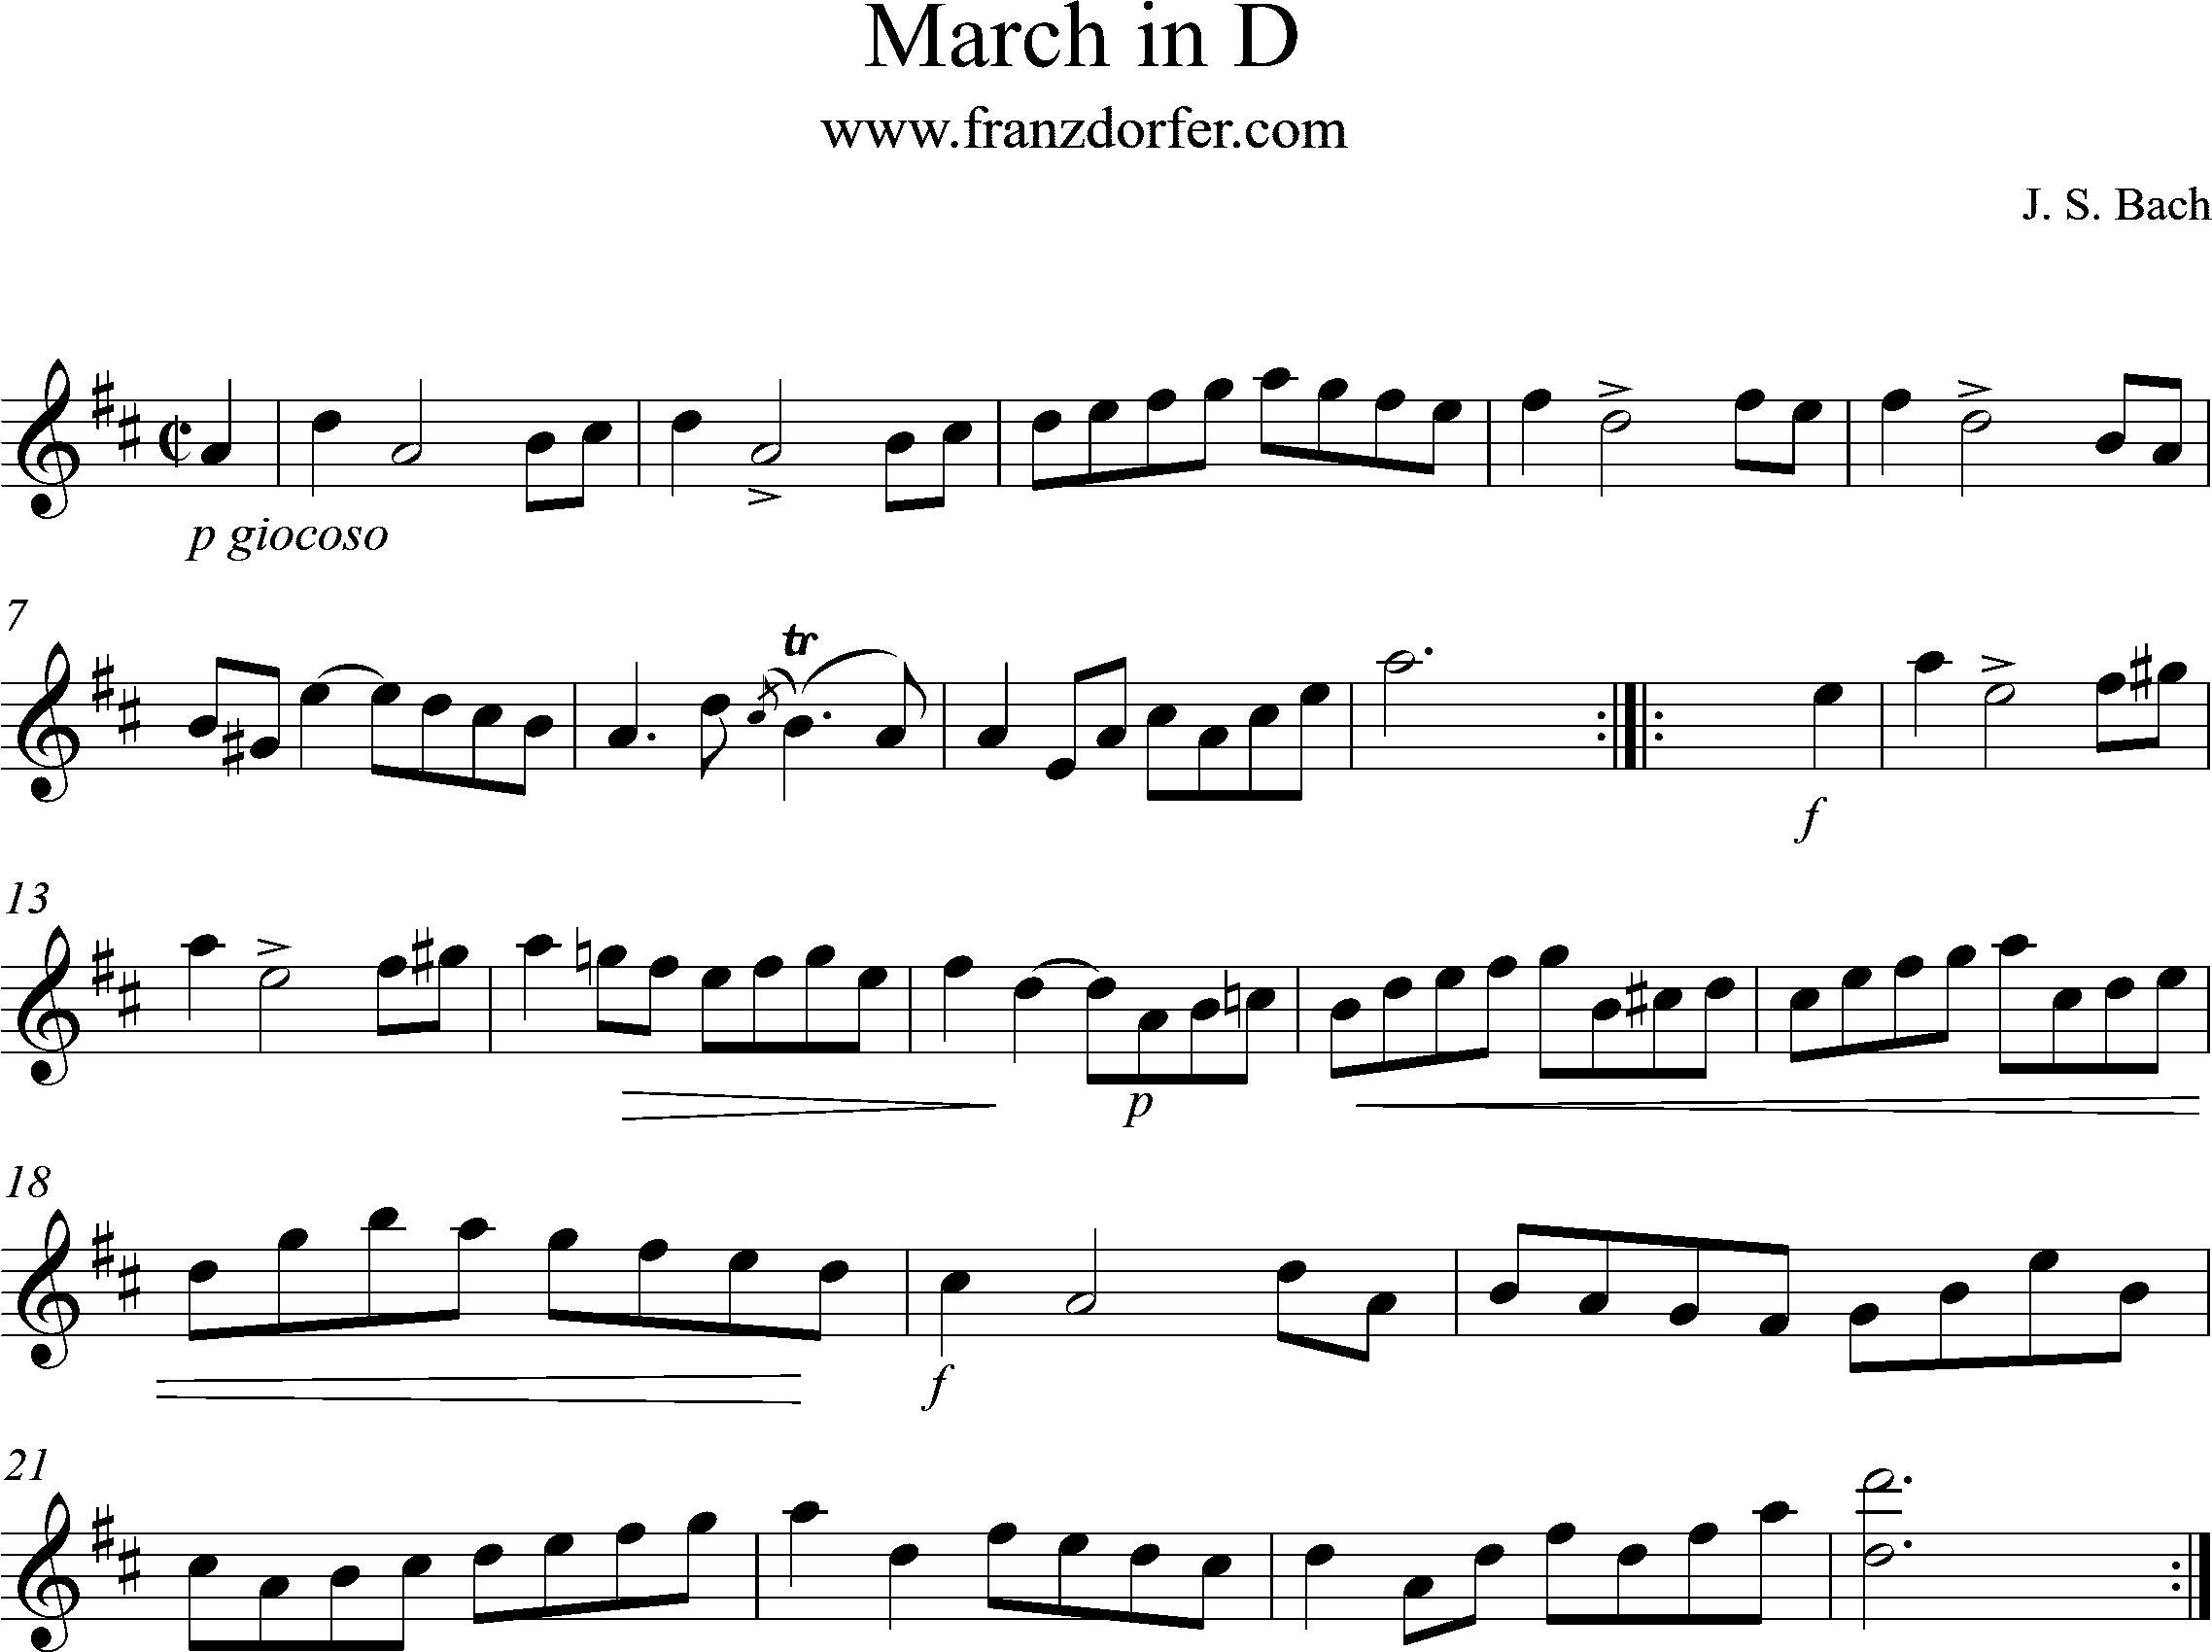 Clarinet, March in D